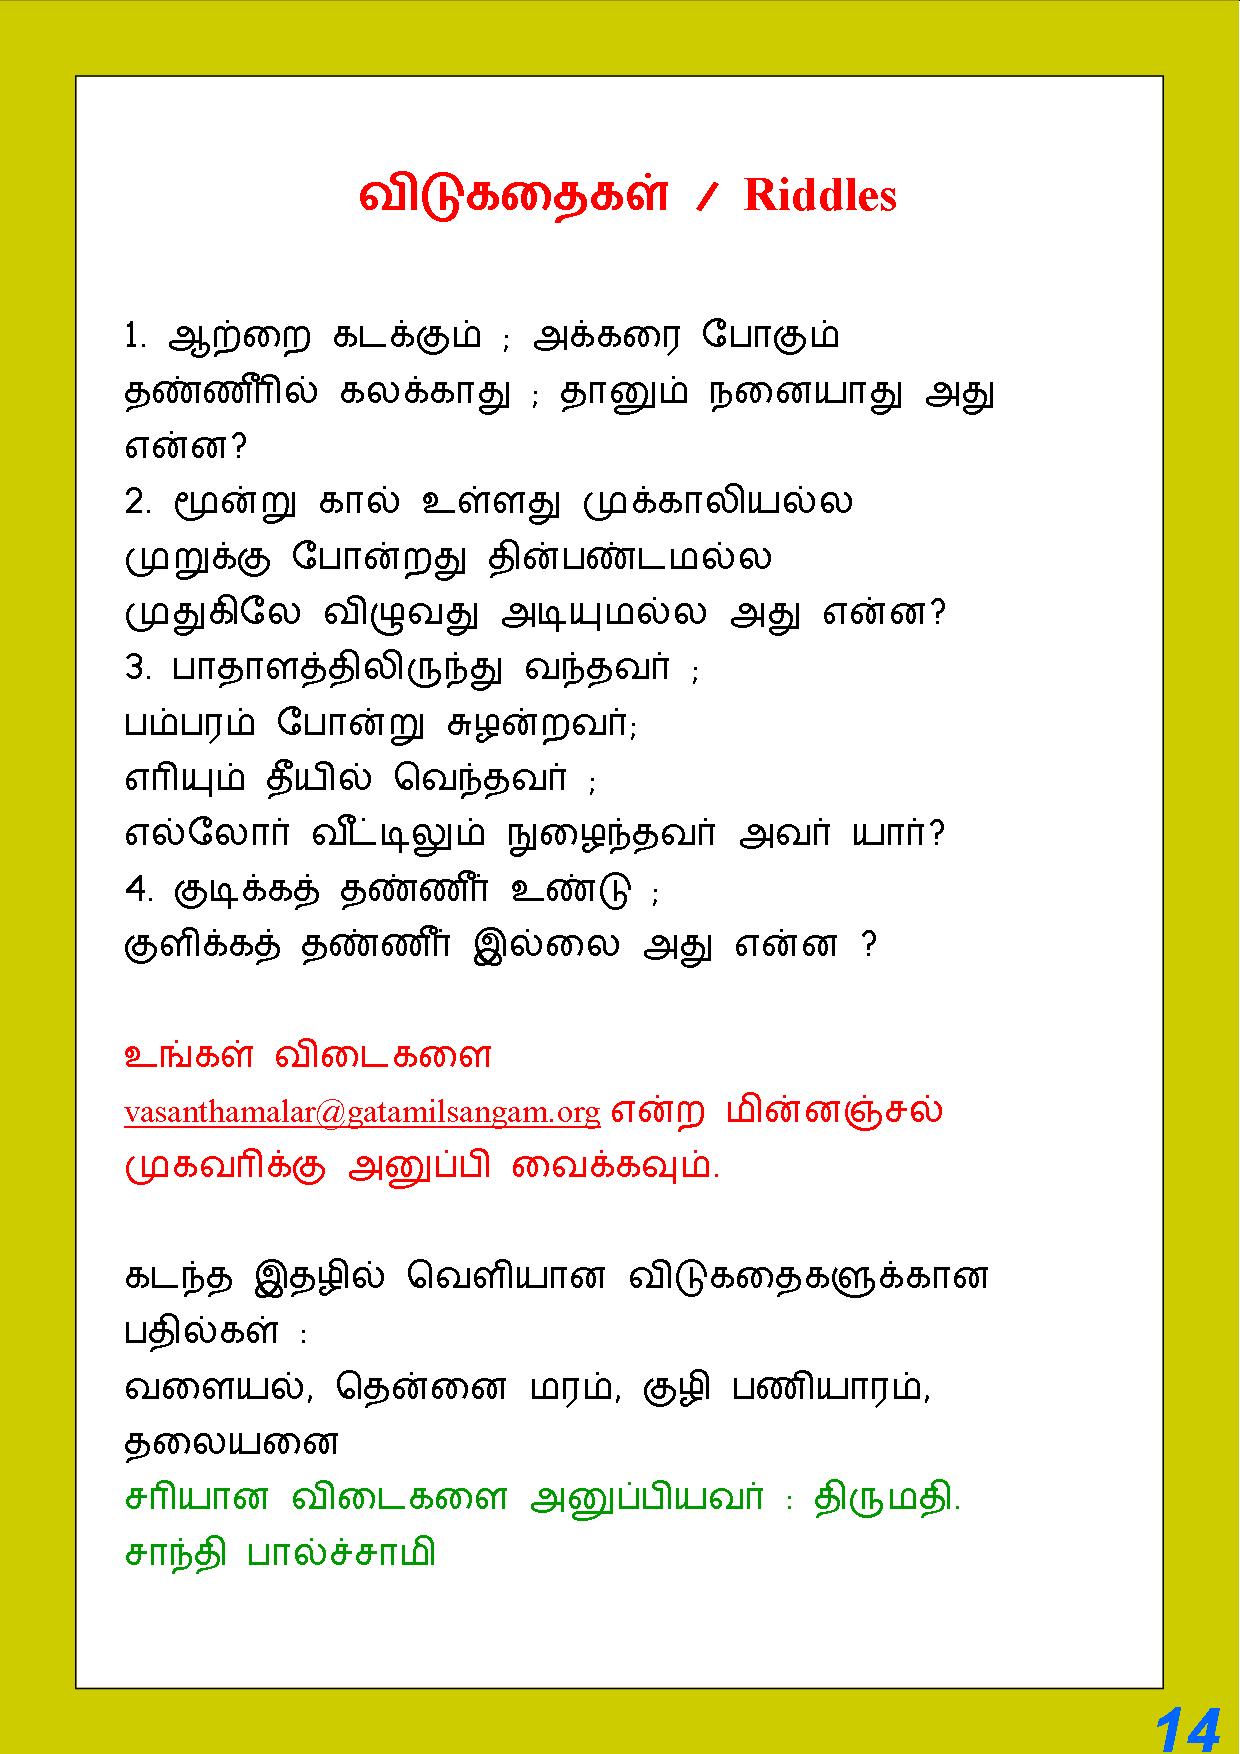 Tamil Kadi Questions And Answers